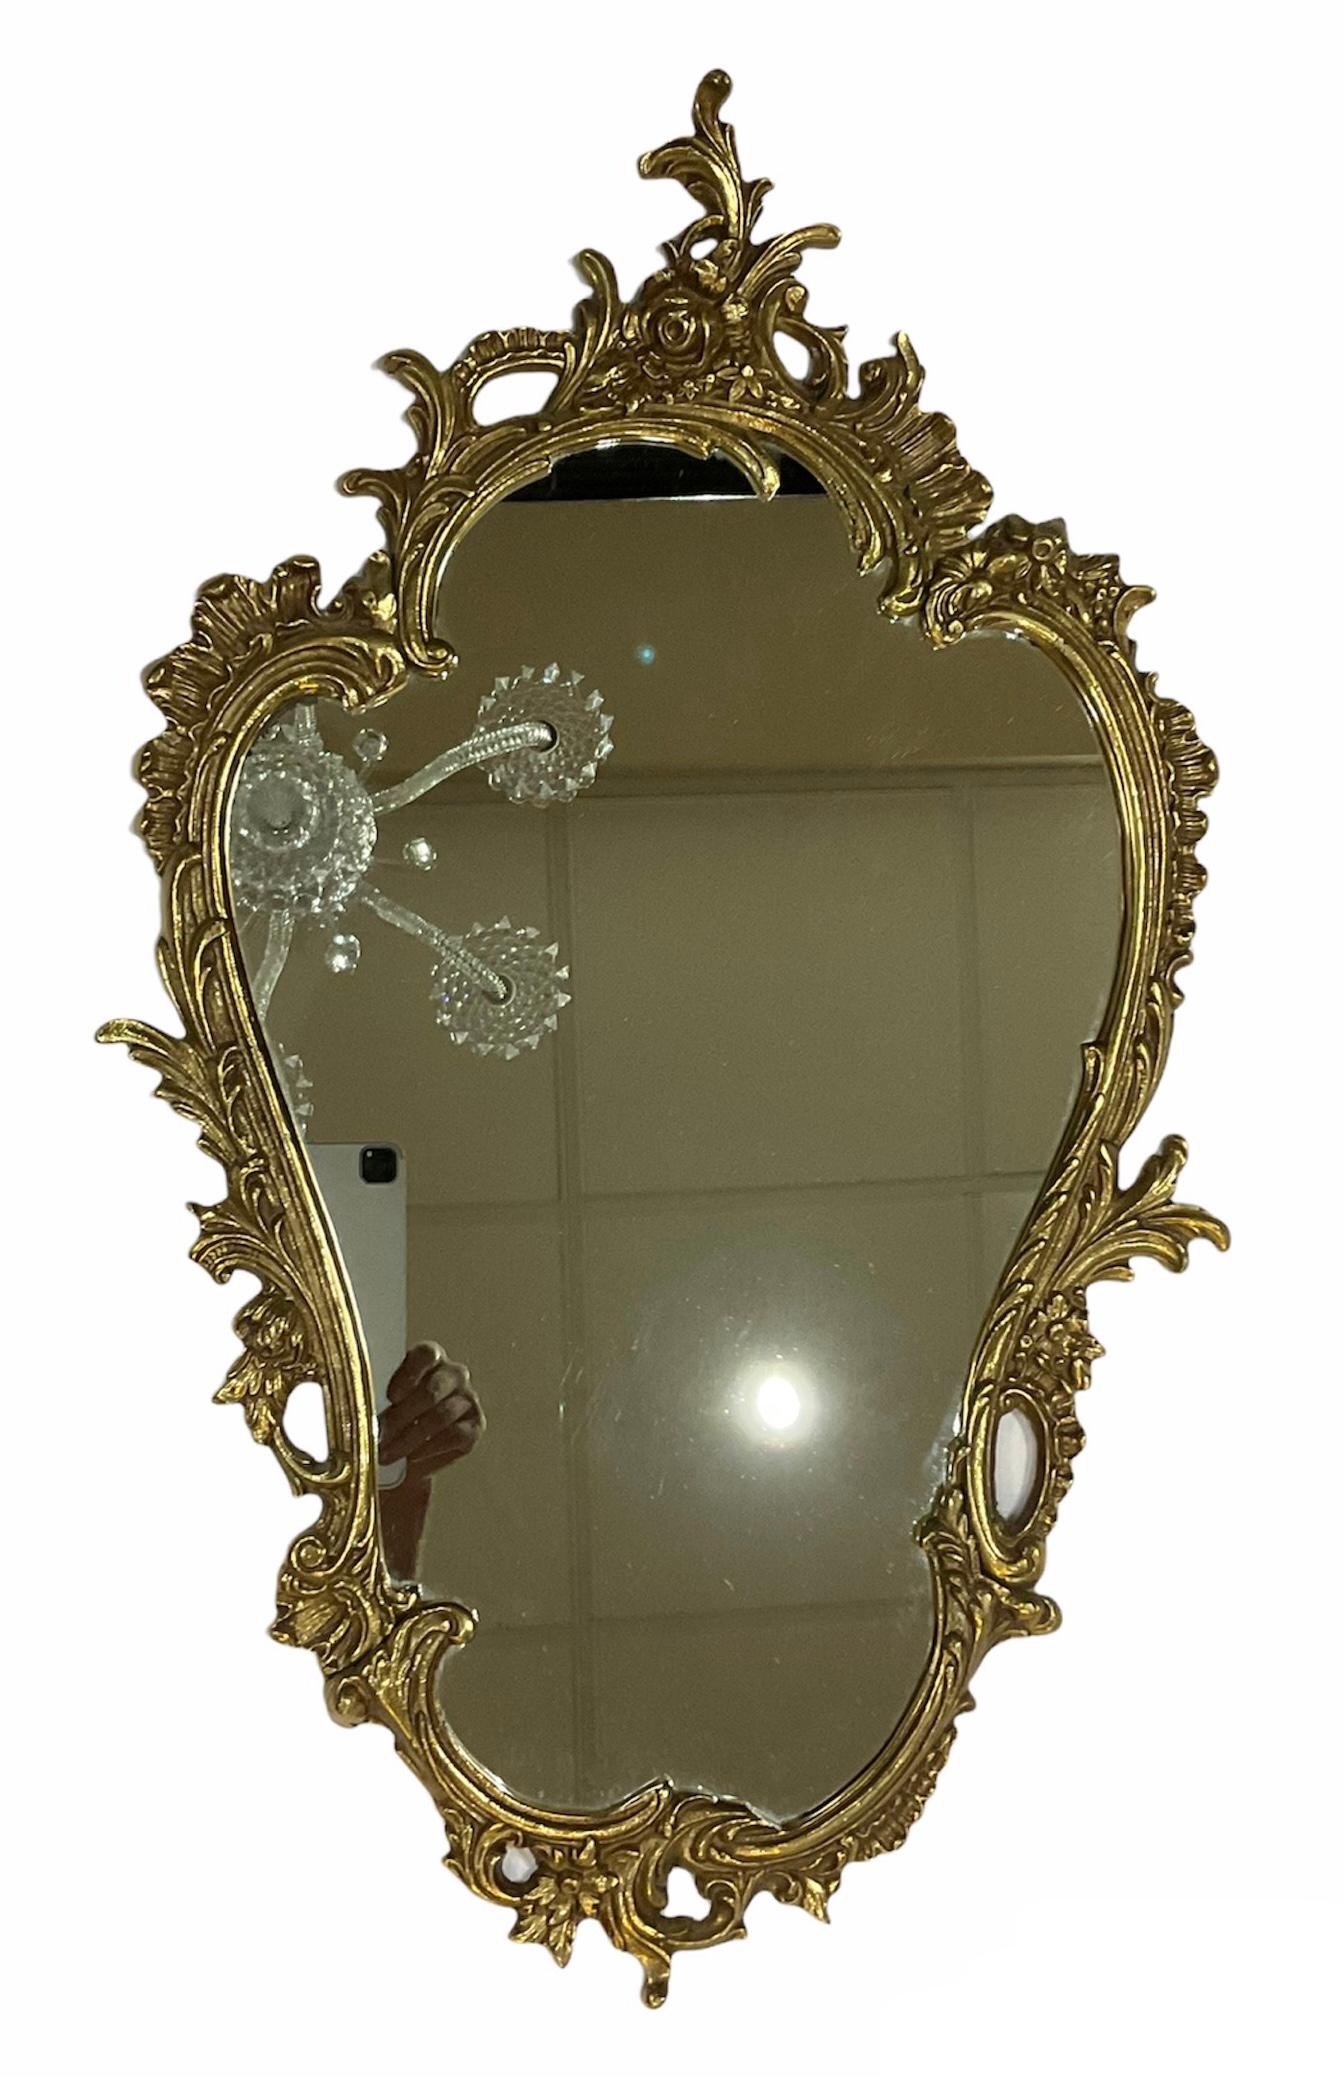 This is a Rococo Style gilt wall console mirror. It is kind of an asymmetric up side down pear shaped mirror. It is adorned with large scrolls of acanthus leaves and “rocailles” in its frame. There is also some branches of flowers interwined with